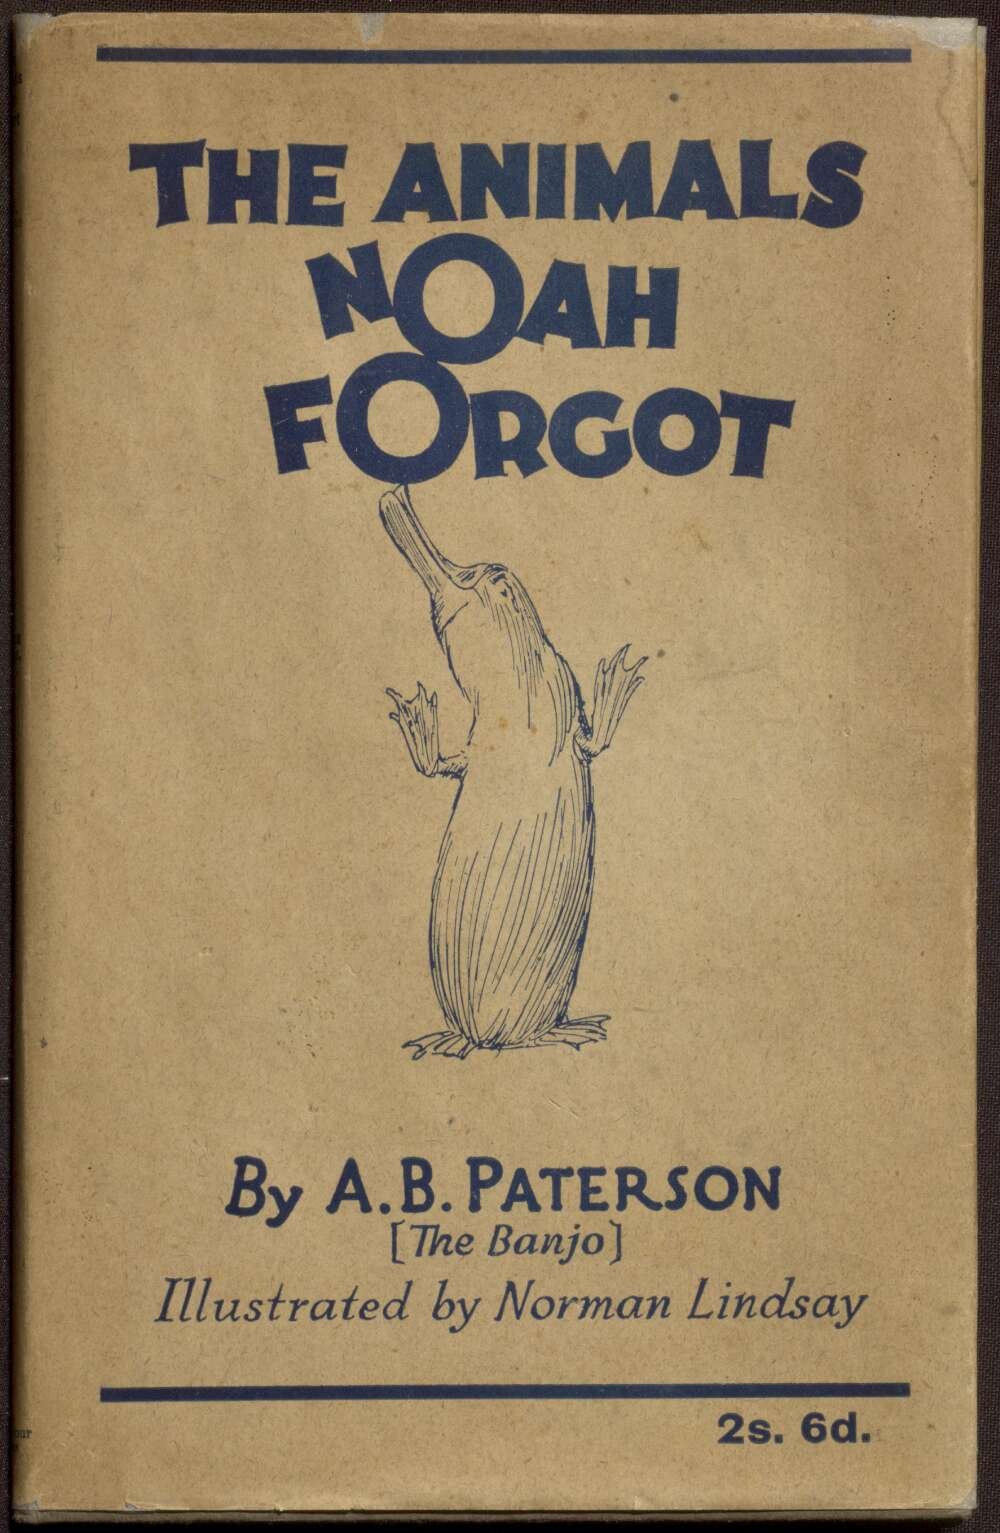 The first page of a book entitled 'The Animals Noah Forgot by A.B Paterson'. 